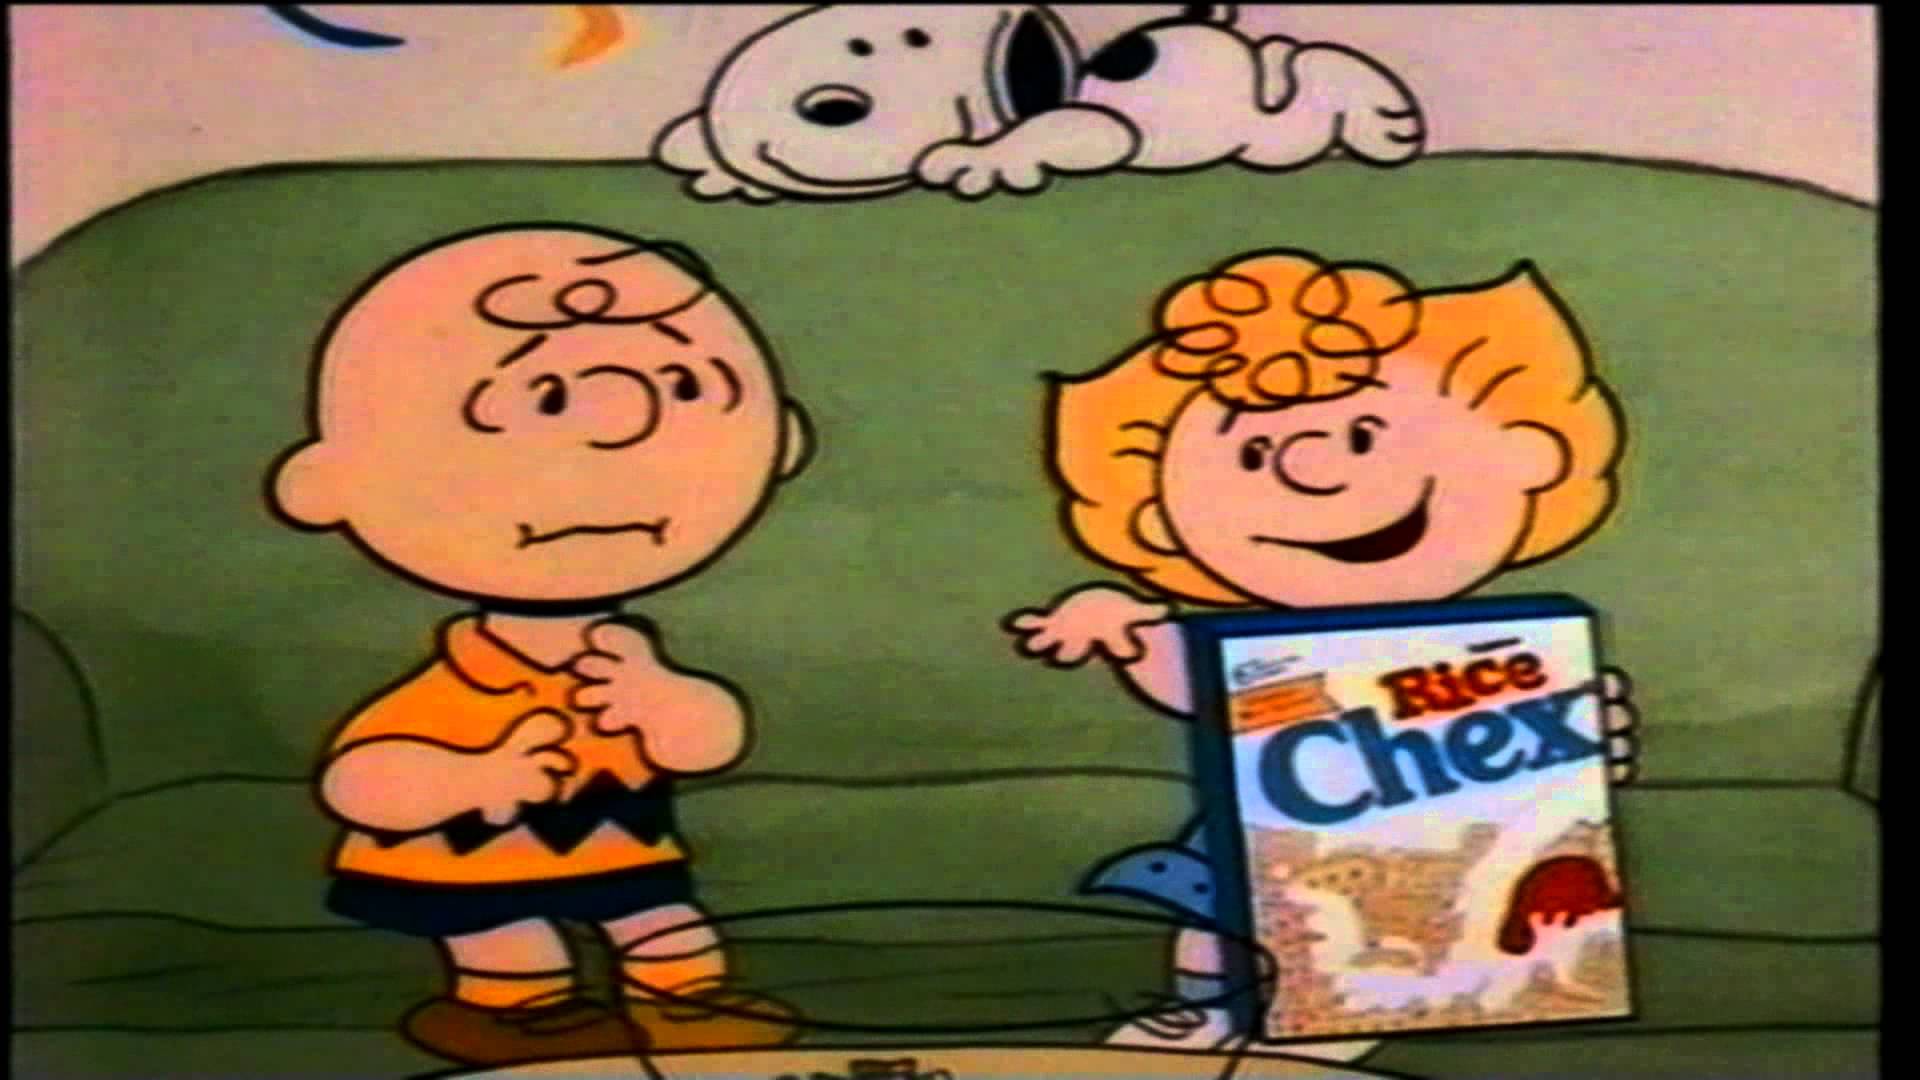 Chex Party Mix Cereal Charlie Brown Peanuts Cartoon TV Commercial ...